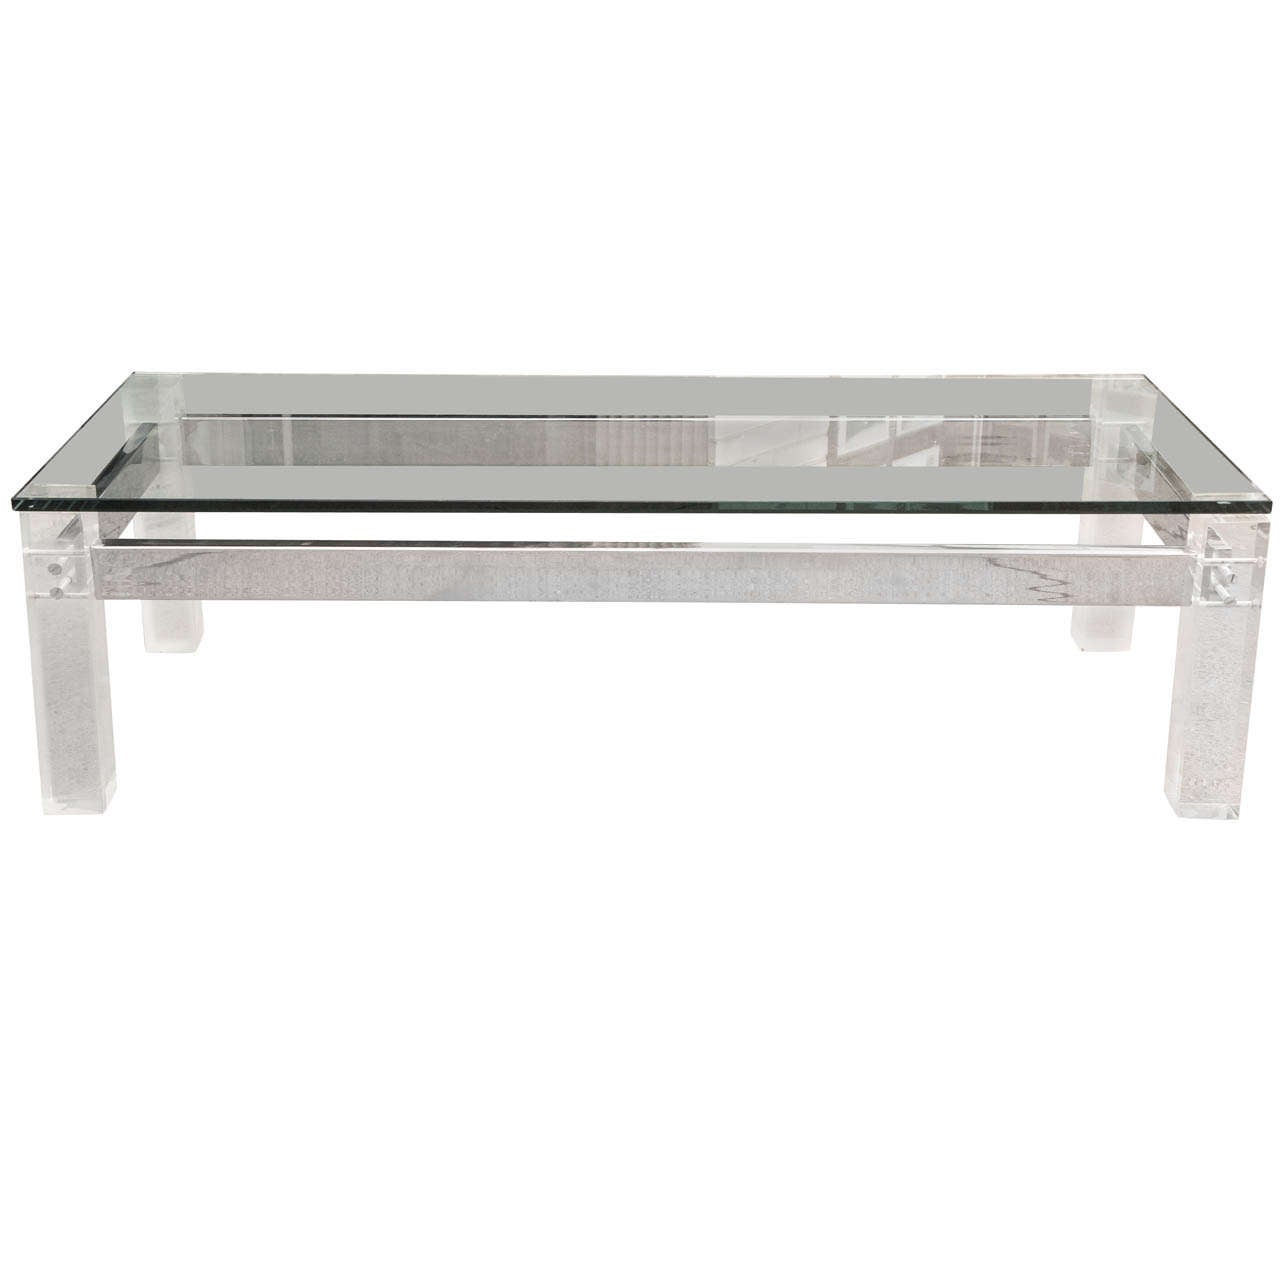 A Vintage 70's Lucite & Chrome Glass Topped Coffee Table